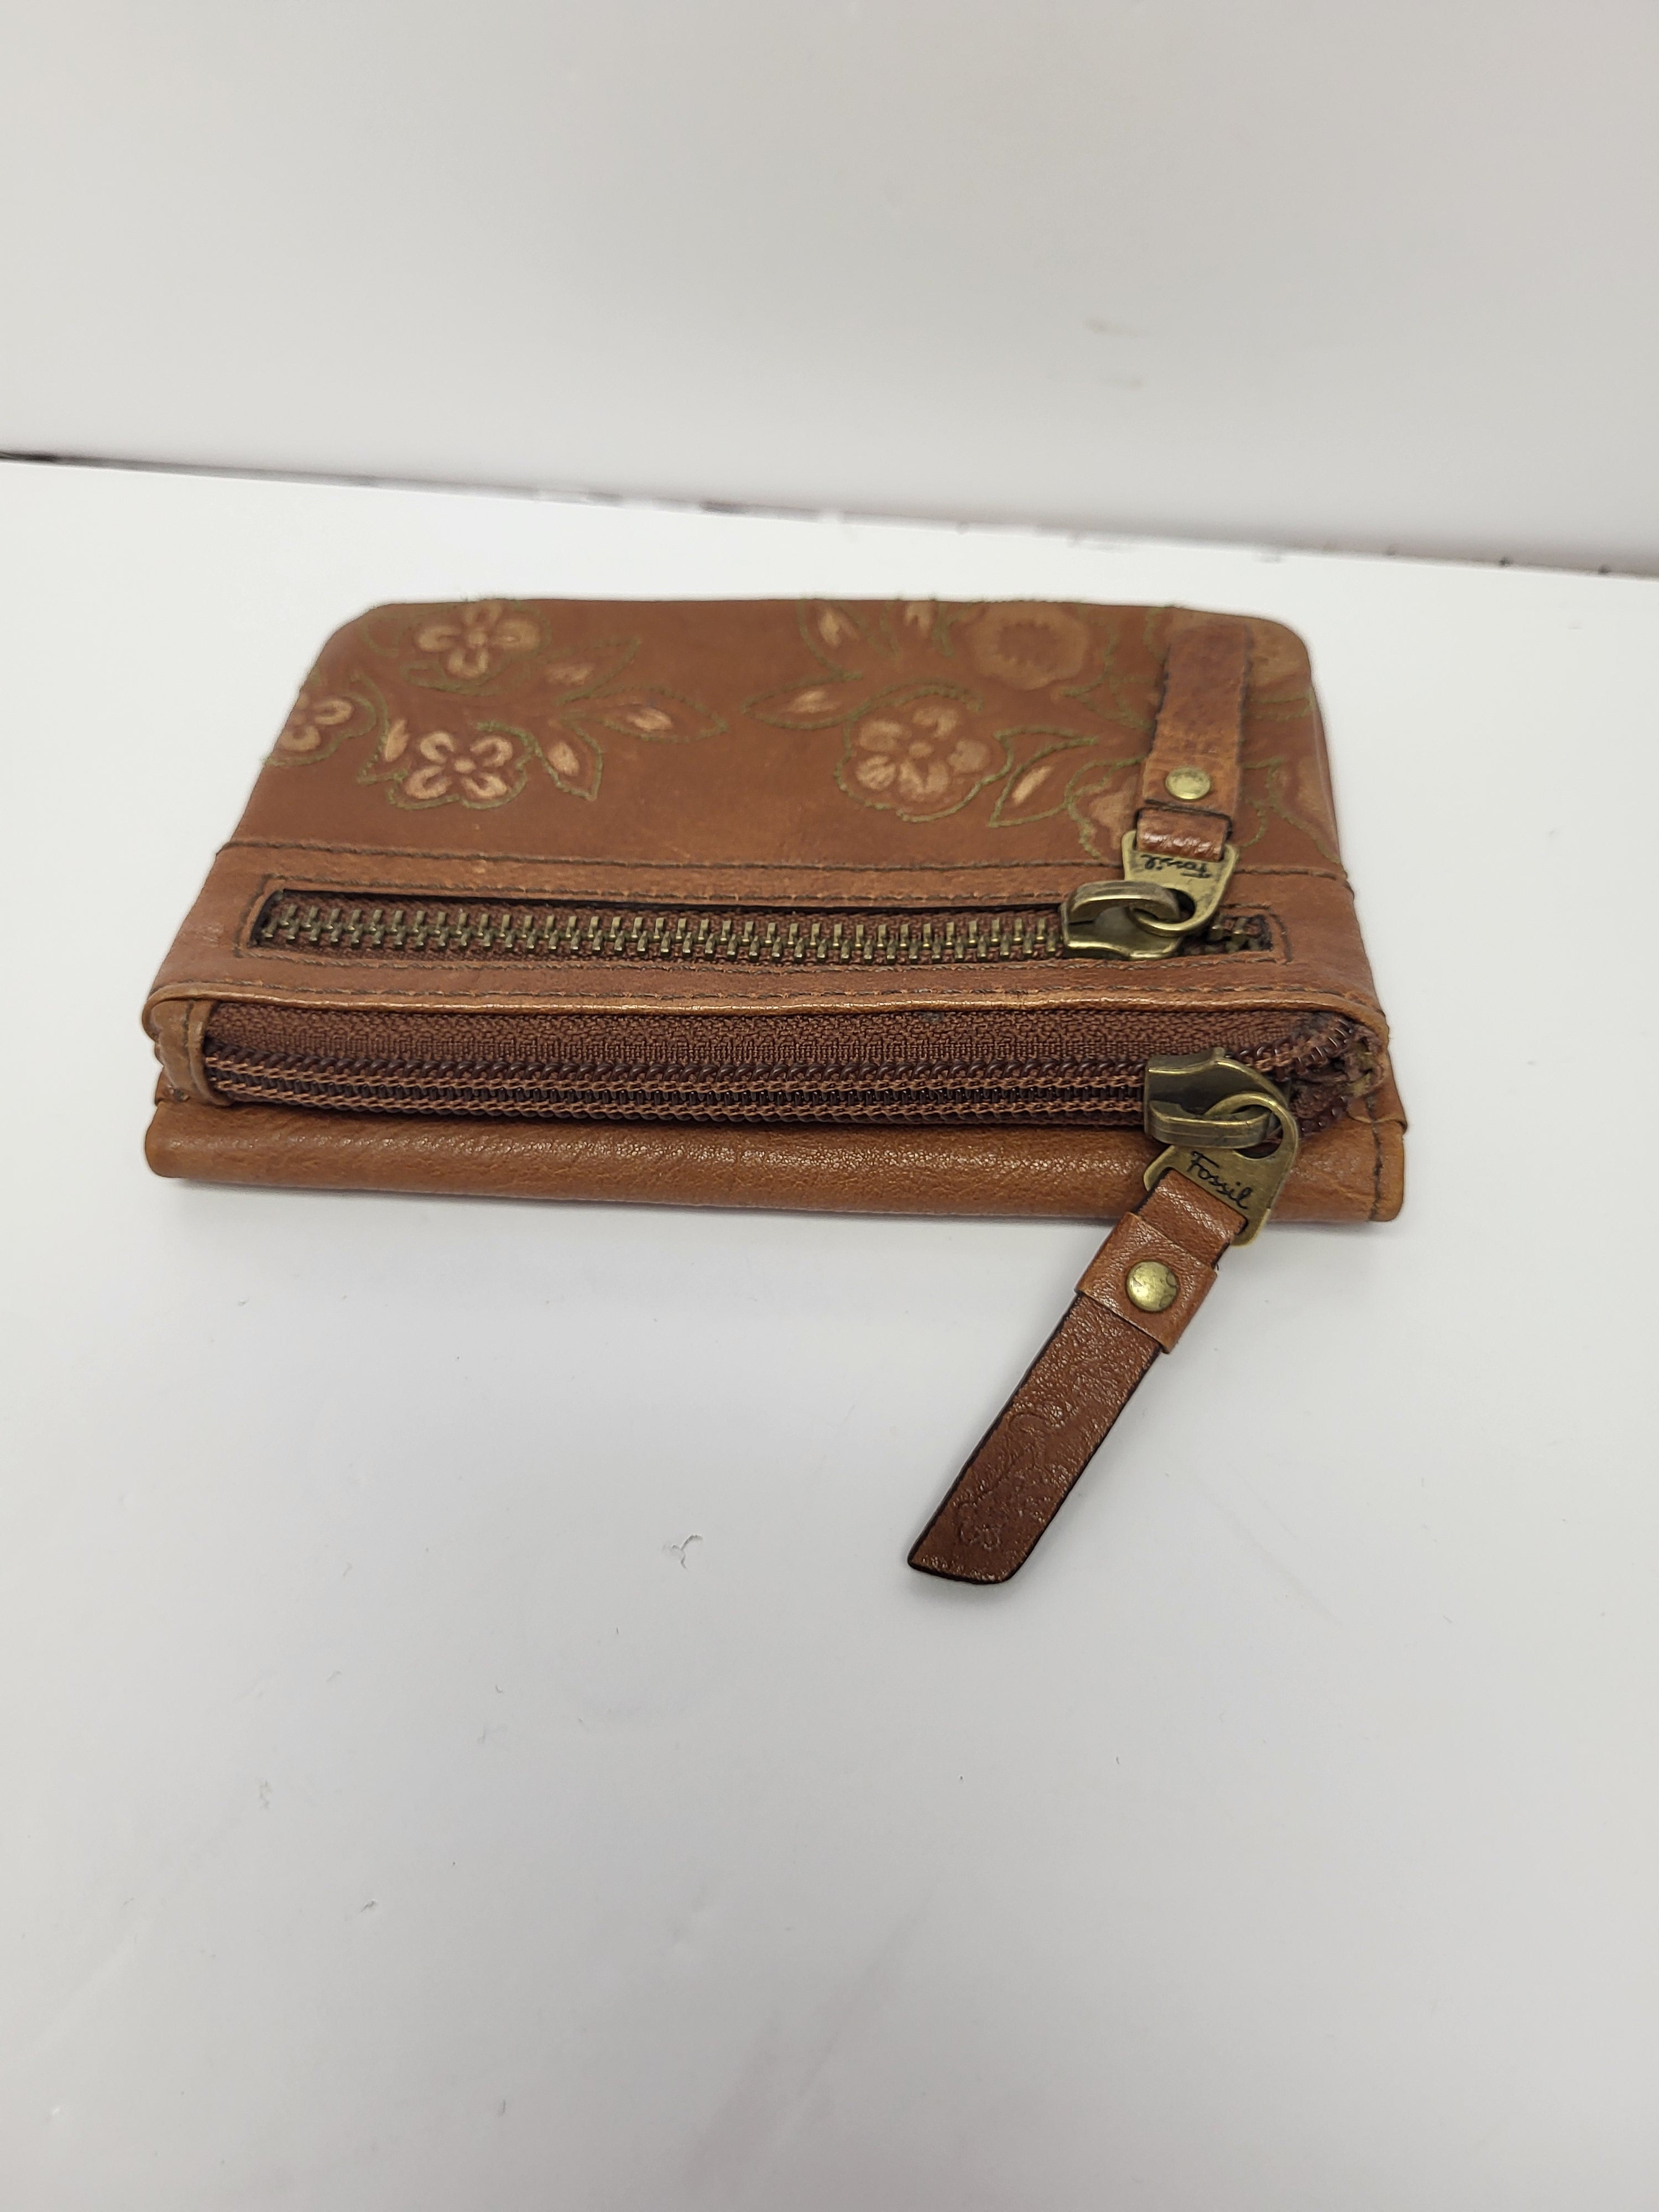 Fossil Floral Design Small Wallet